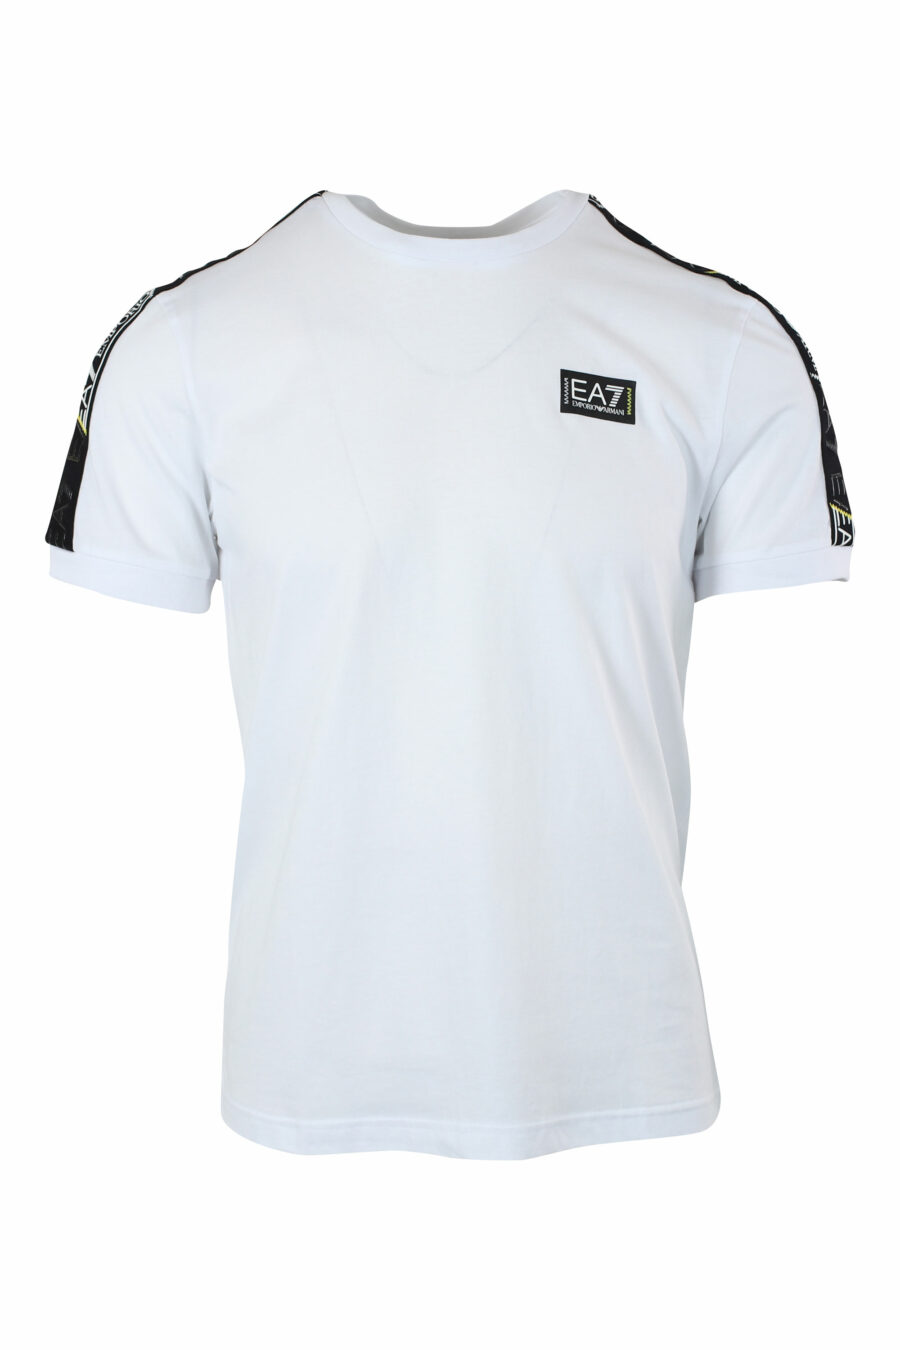 White T-shirt with logo tape on shoulder and black minilogue - IMG 9642